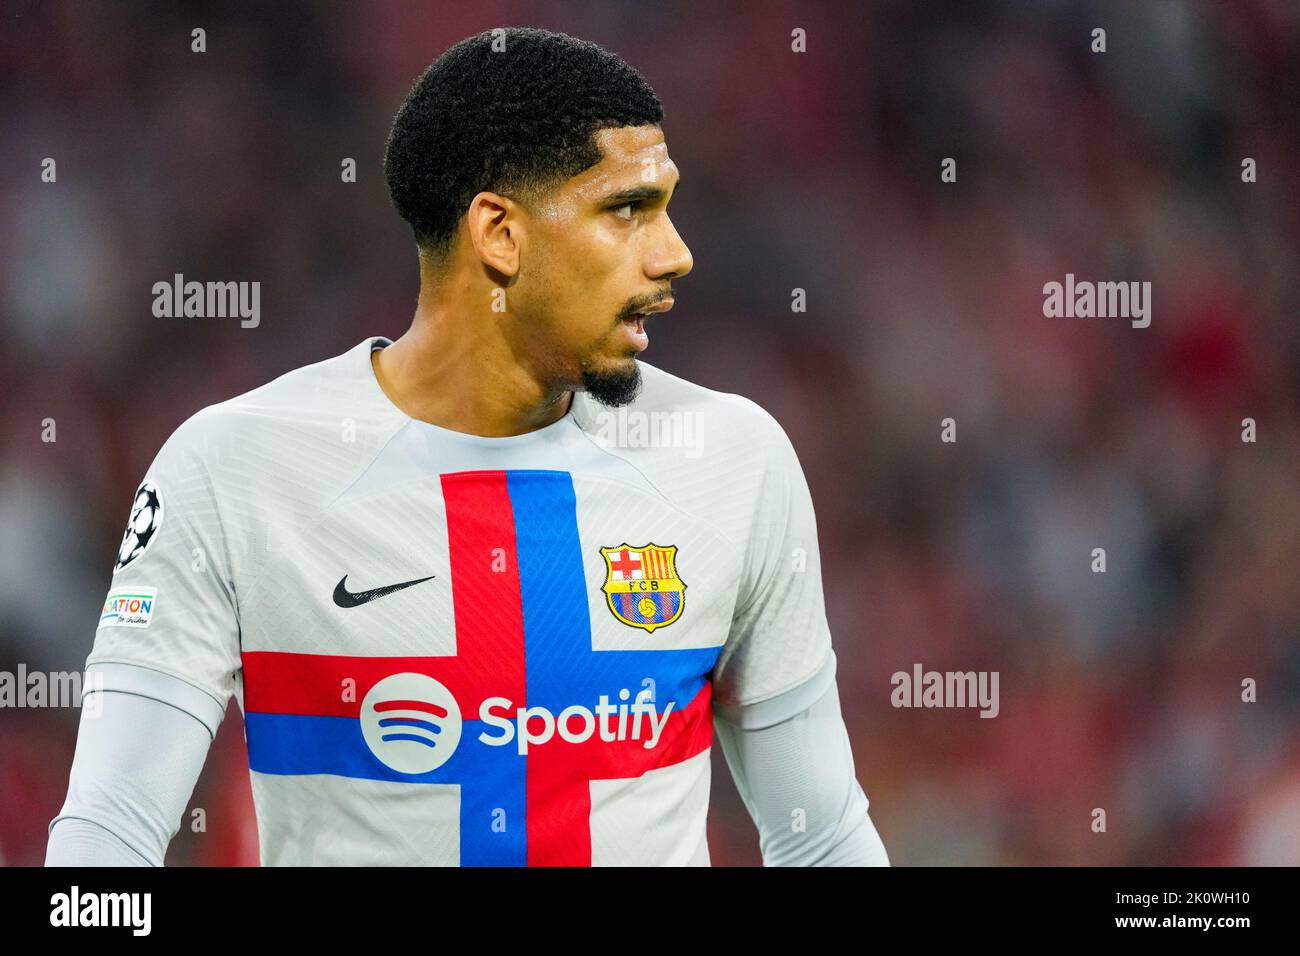 Munchen, Germany. 13th Sep, 2022. MUNCHEN, GERMANY - SEPTEMBER 13: Ronald Araujo of Barcelona during the UEFA Champions League group C match between Bayern Munchen and Barcelona at Allianz Arena on September 13, 2022 in Munchen, Germany (Photo by Geert van Erven/Orange Pictures) Credit: Orange Pics BV/Alamy Live News Stock Photo